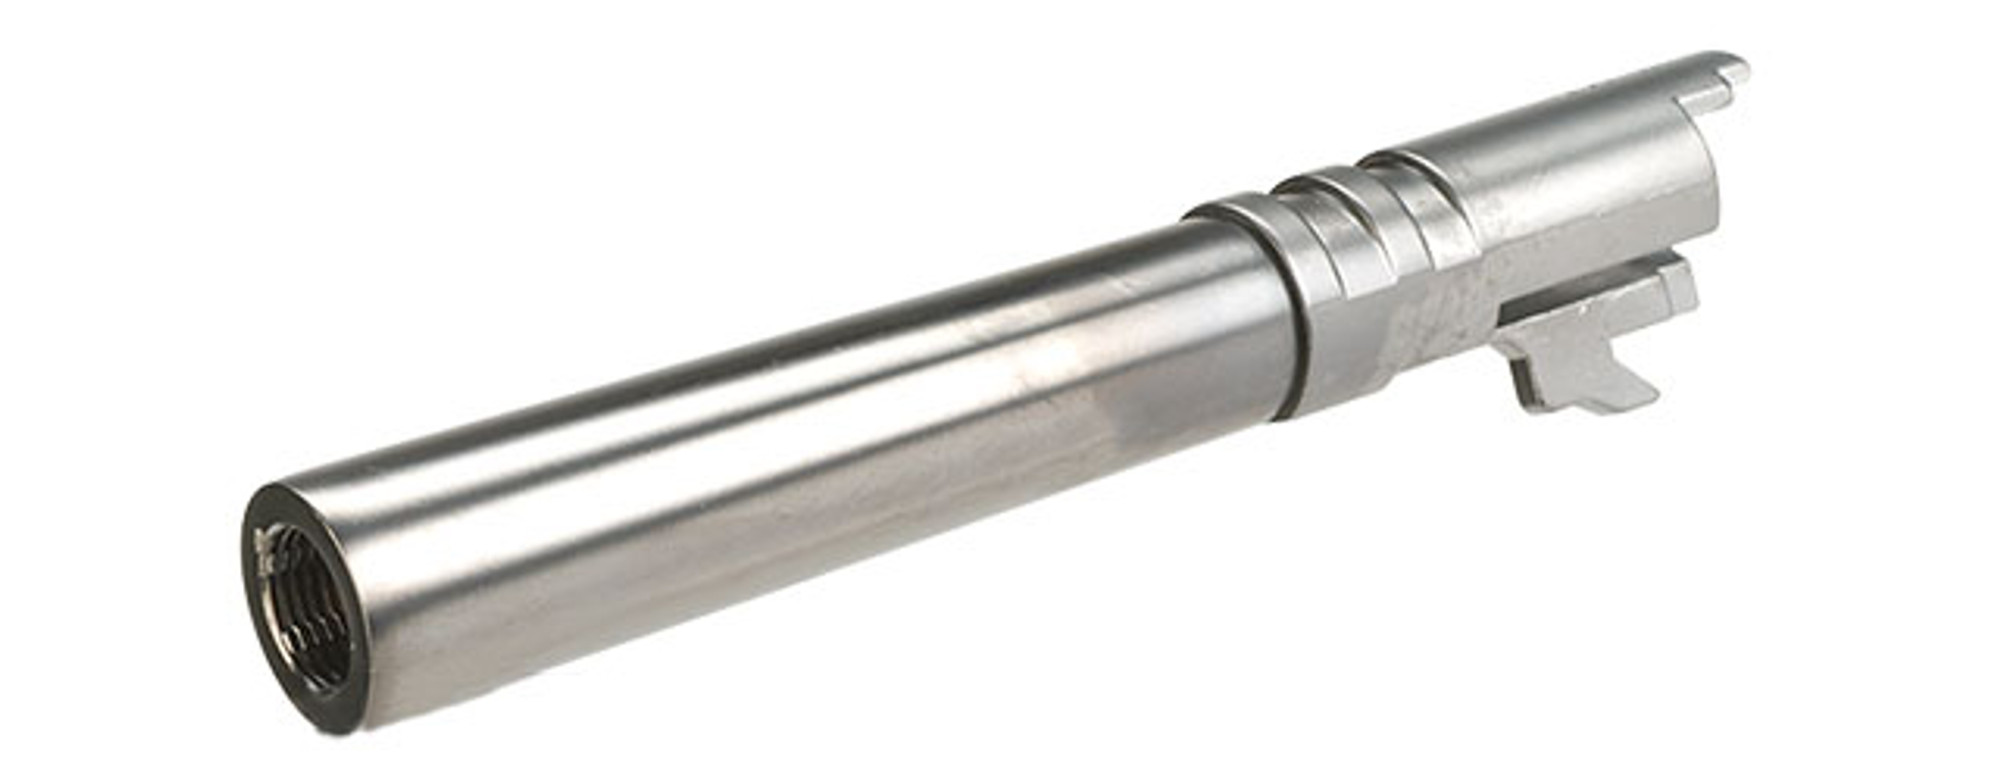 WE-Tech Bull / Match Profile Outer Barrel for WE / TM Airsoft GBB Hi-Capa / 2011 / 5.1 Series Pistols - Silver